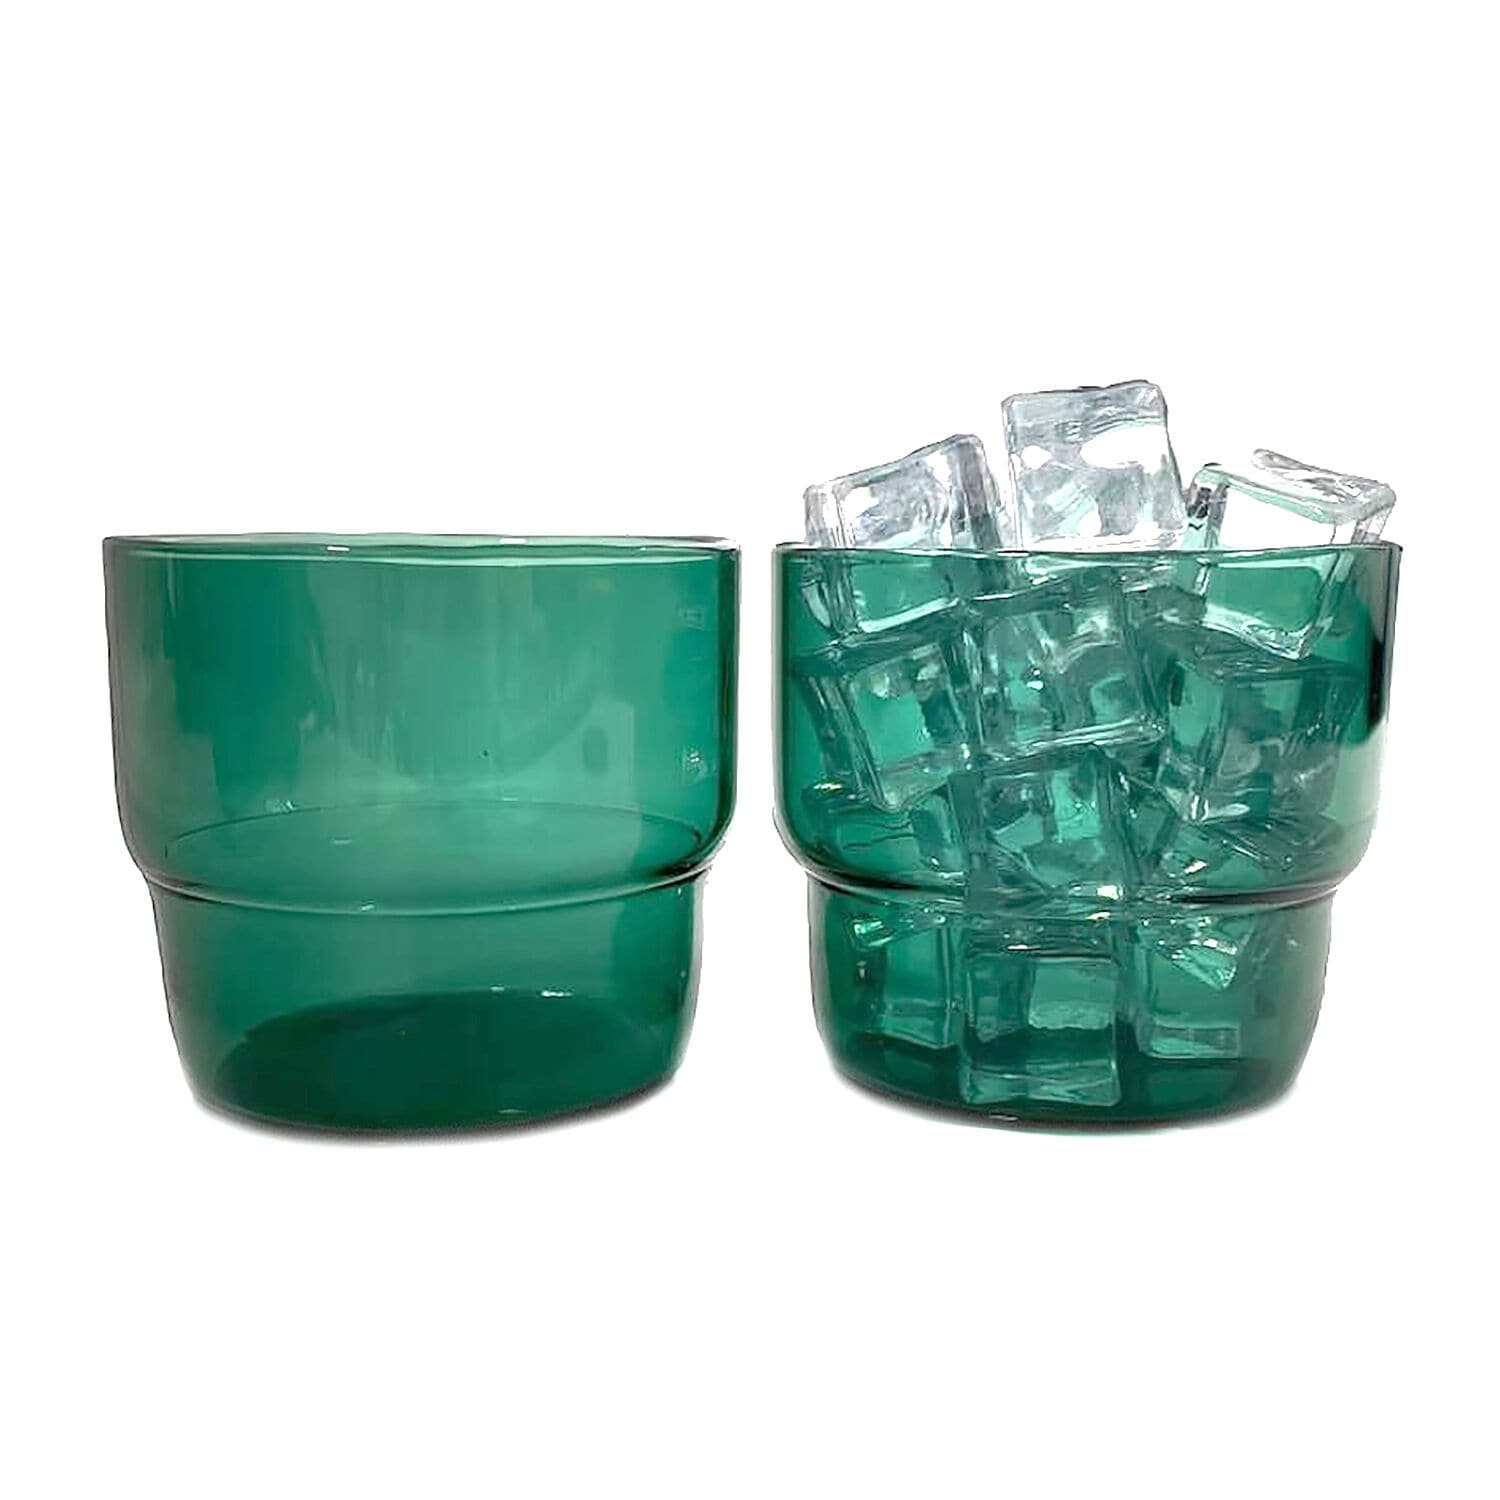 https://ak1.ostkcdn.com/images/products/is/images/direct/9a4dd6efce6d36733e25ecd5a317ffe57ad322b0/Borosilicate-Green-Glass-Stackable-Tumbler-Set-of-2.jpg